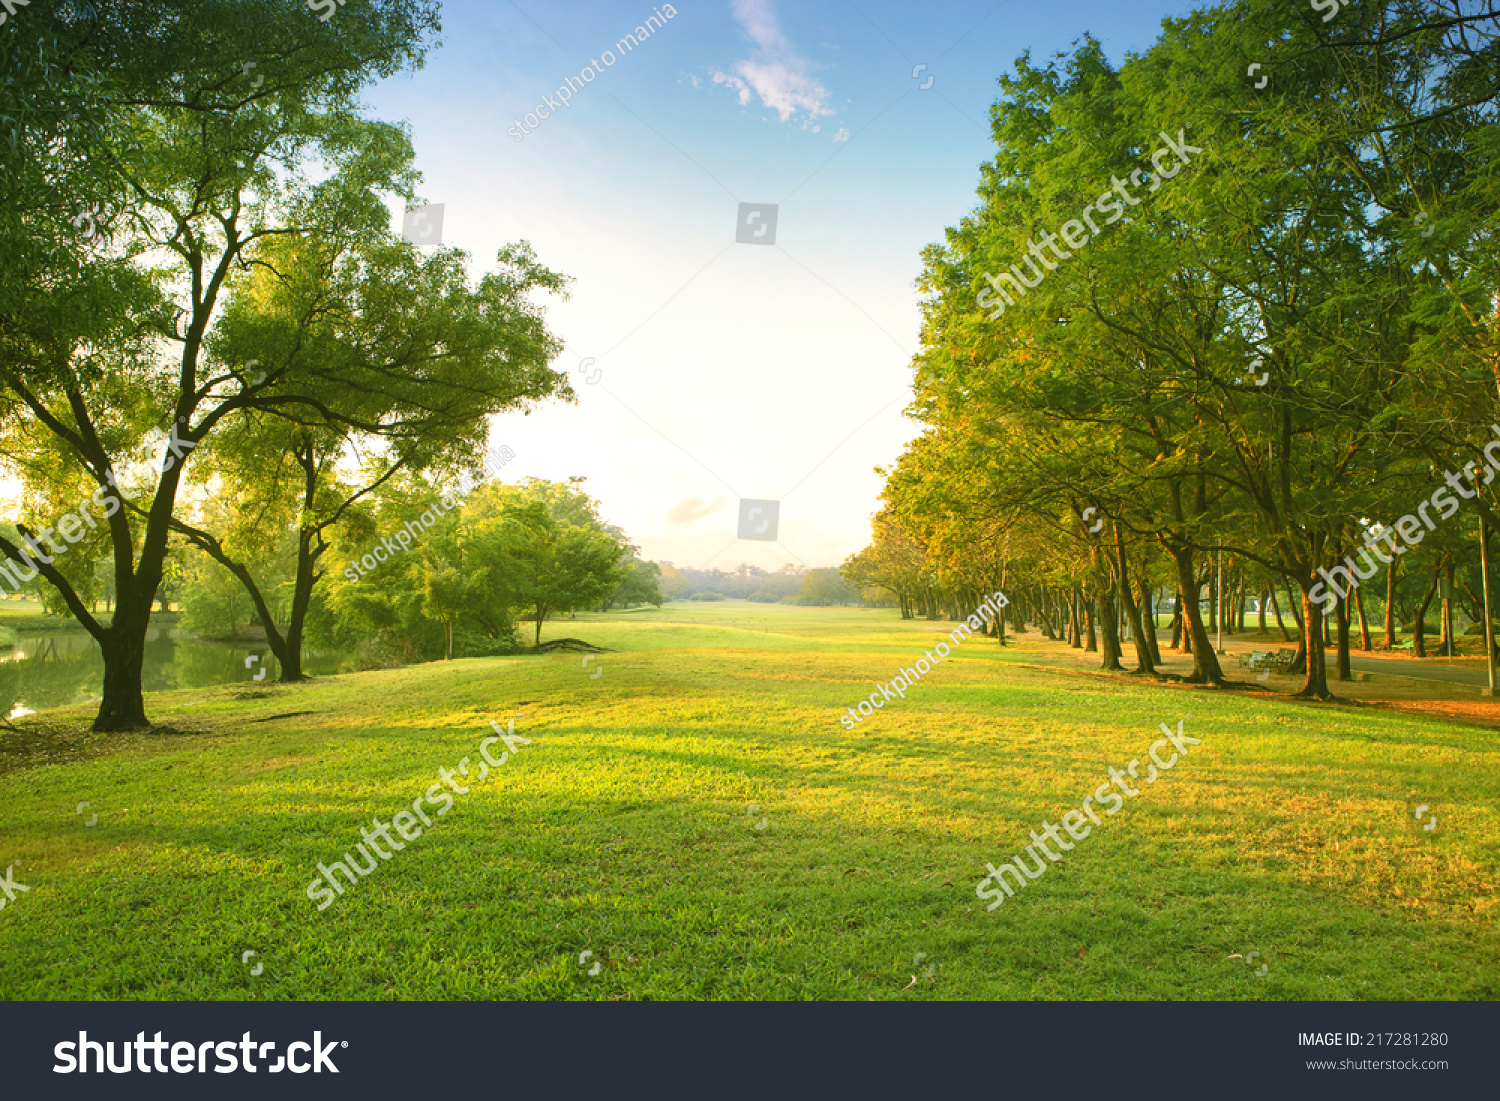 beautiful morning light in public park with green grass field  #217281280